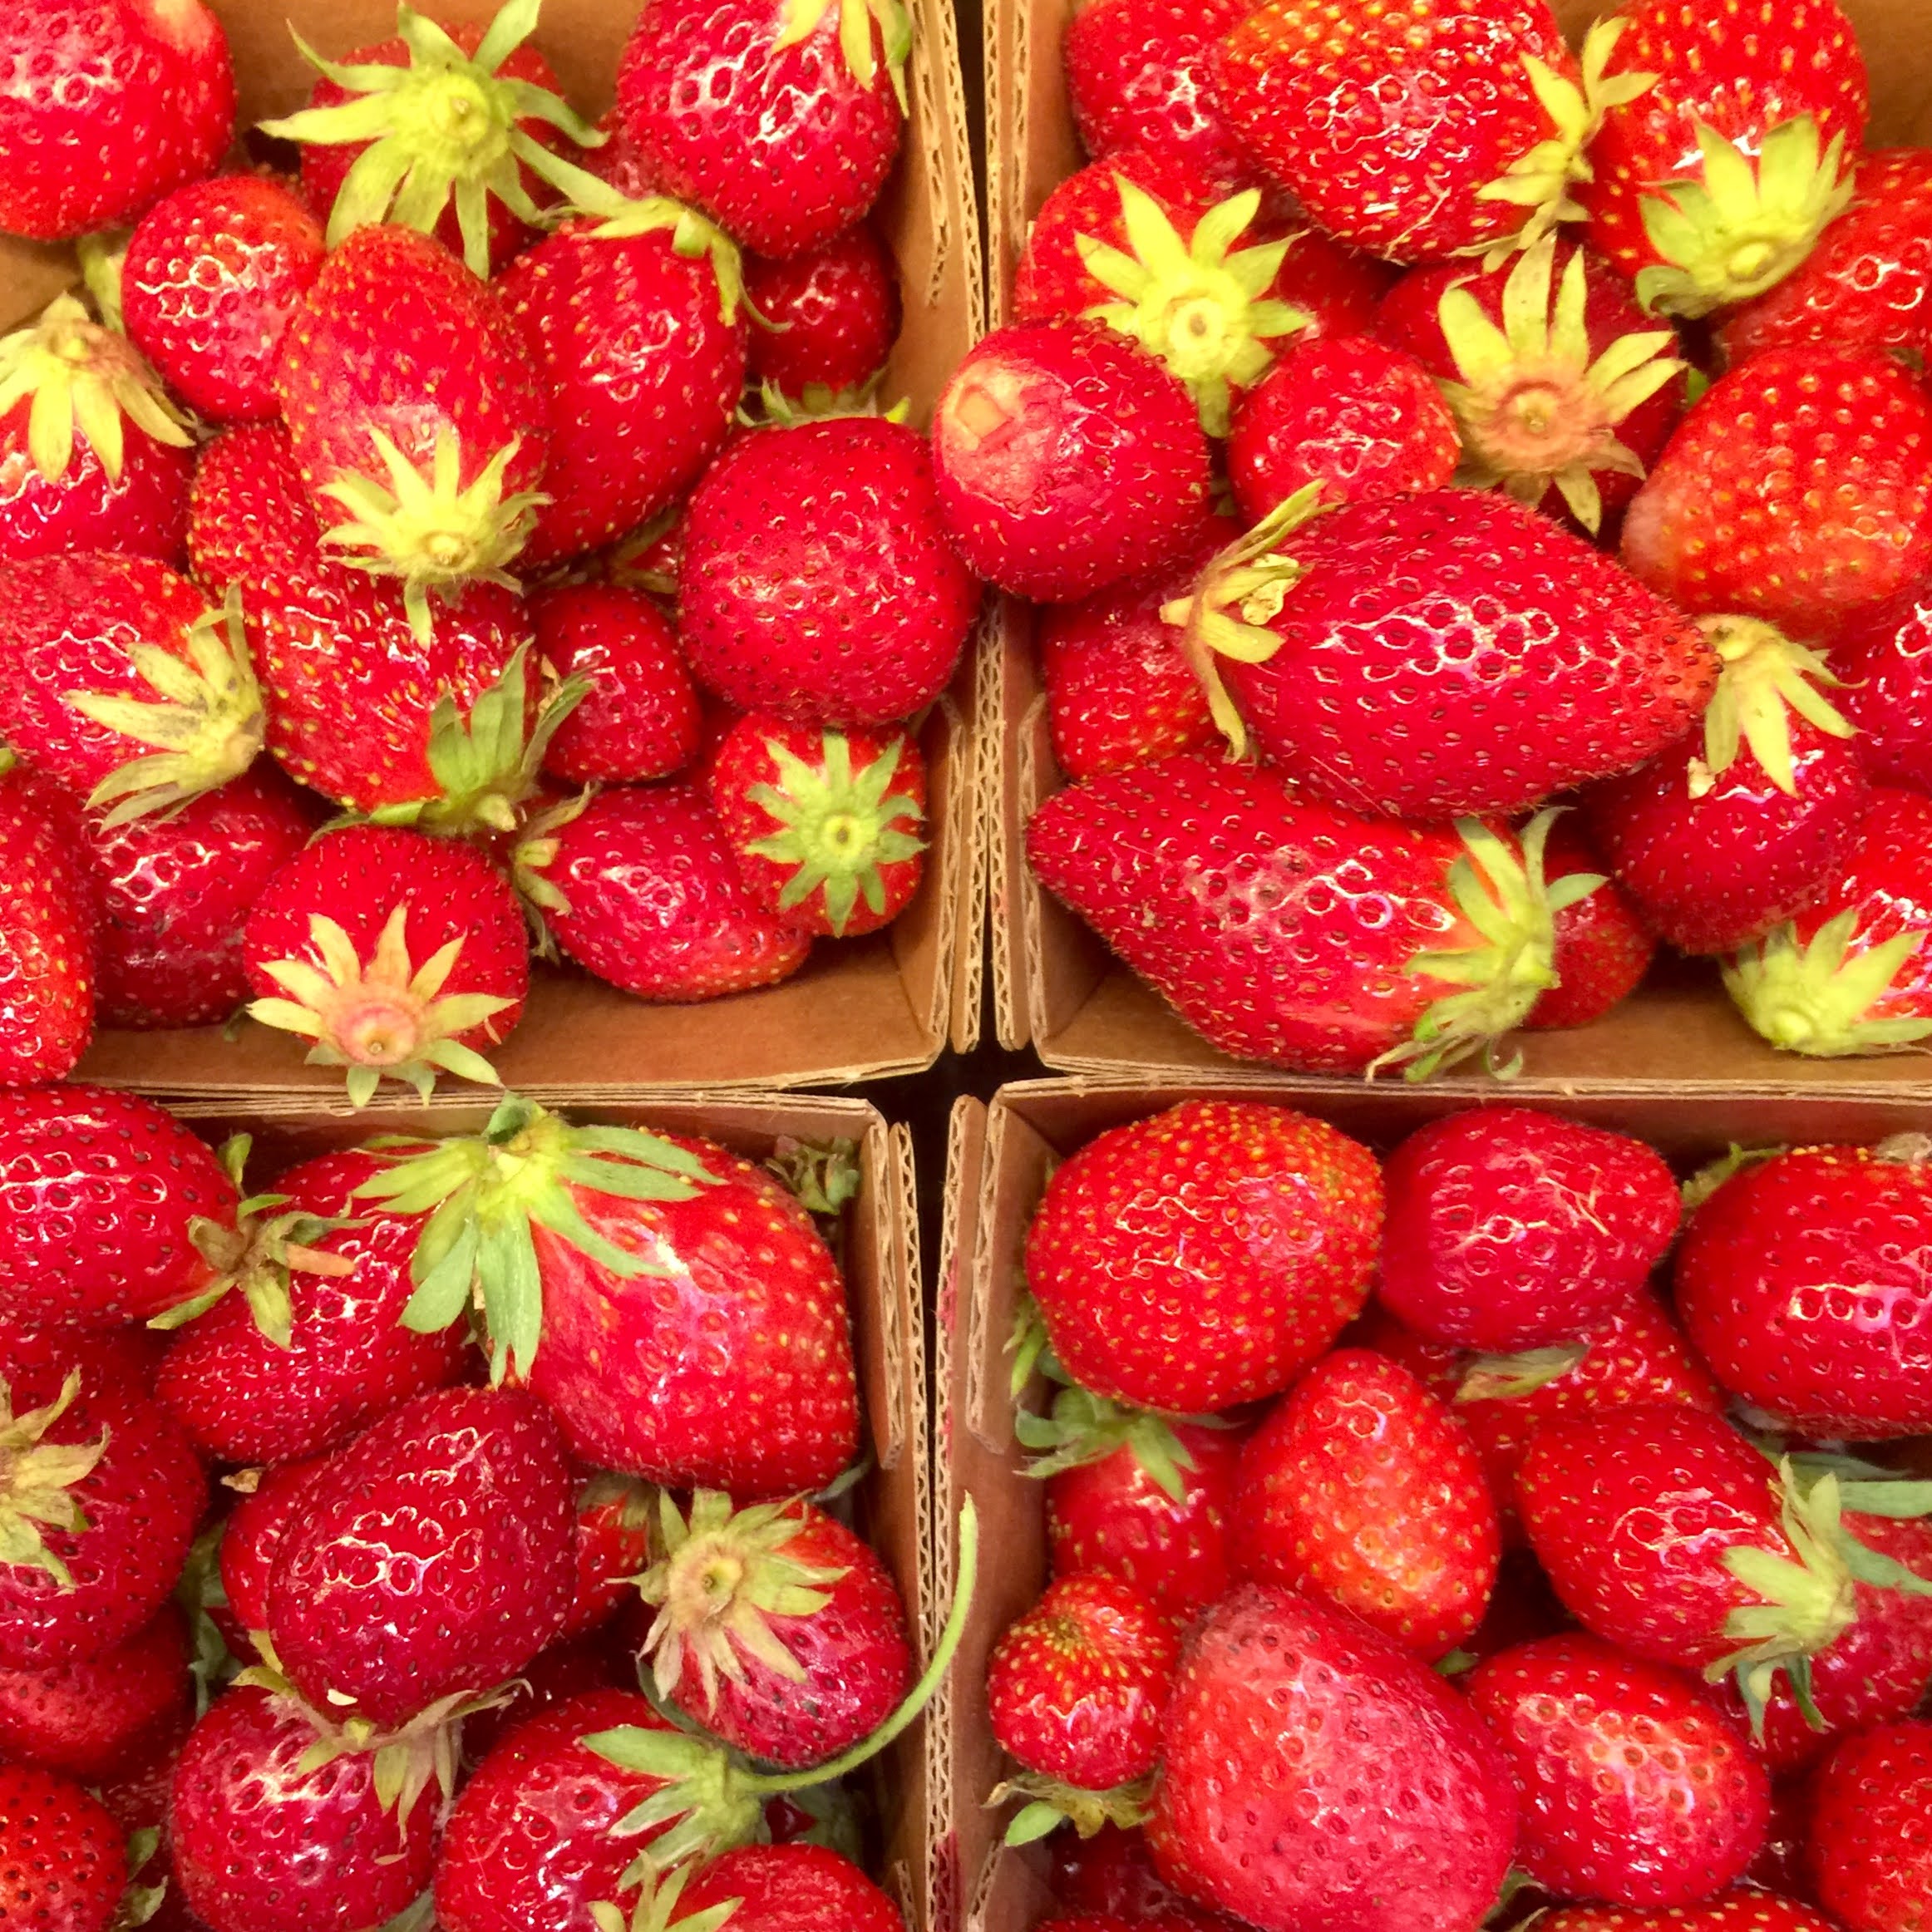 strawberries at a farm stand